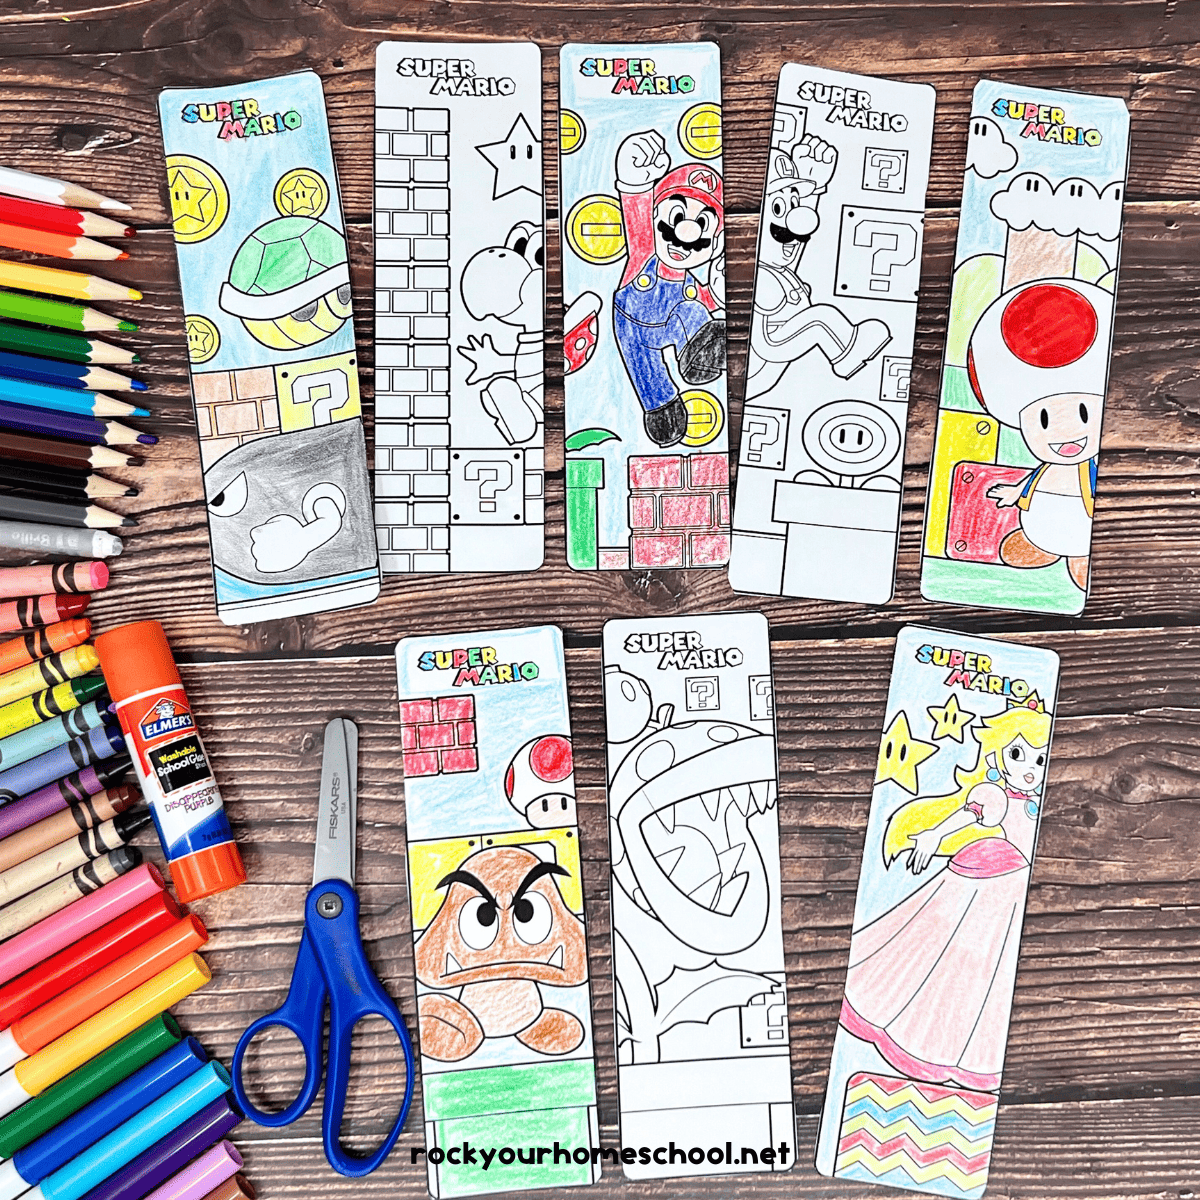 8 Free Printable Super Mario Bookmarks to Color and Enjoy